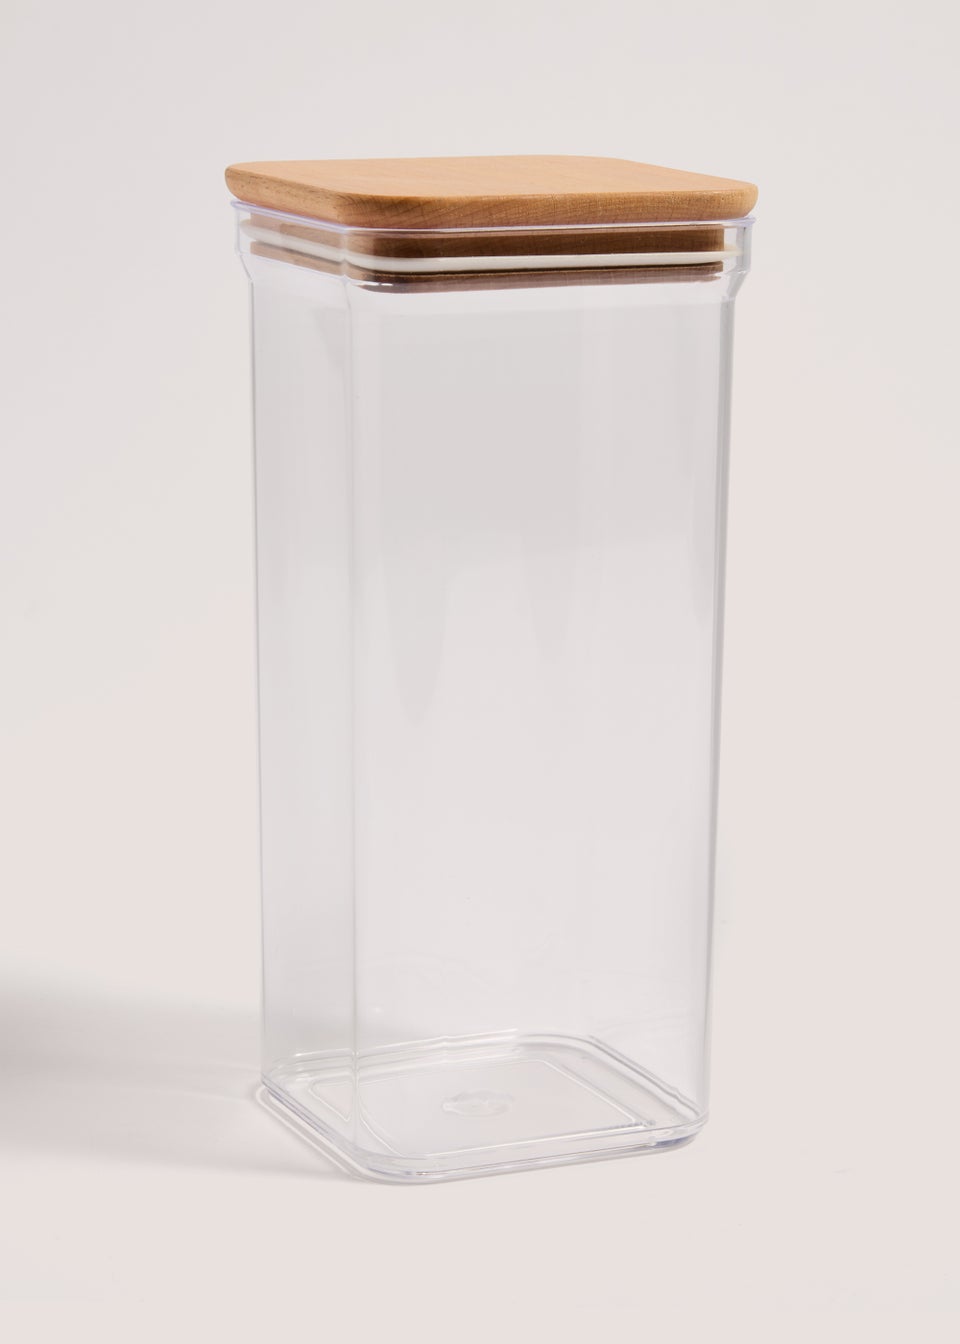 Clear Plastic Food Storage with Wooden Lid (22cm x 9cm)